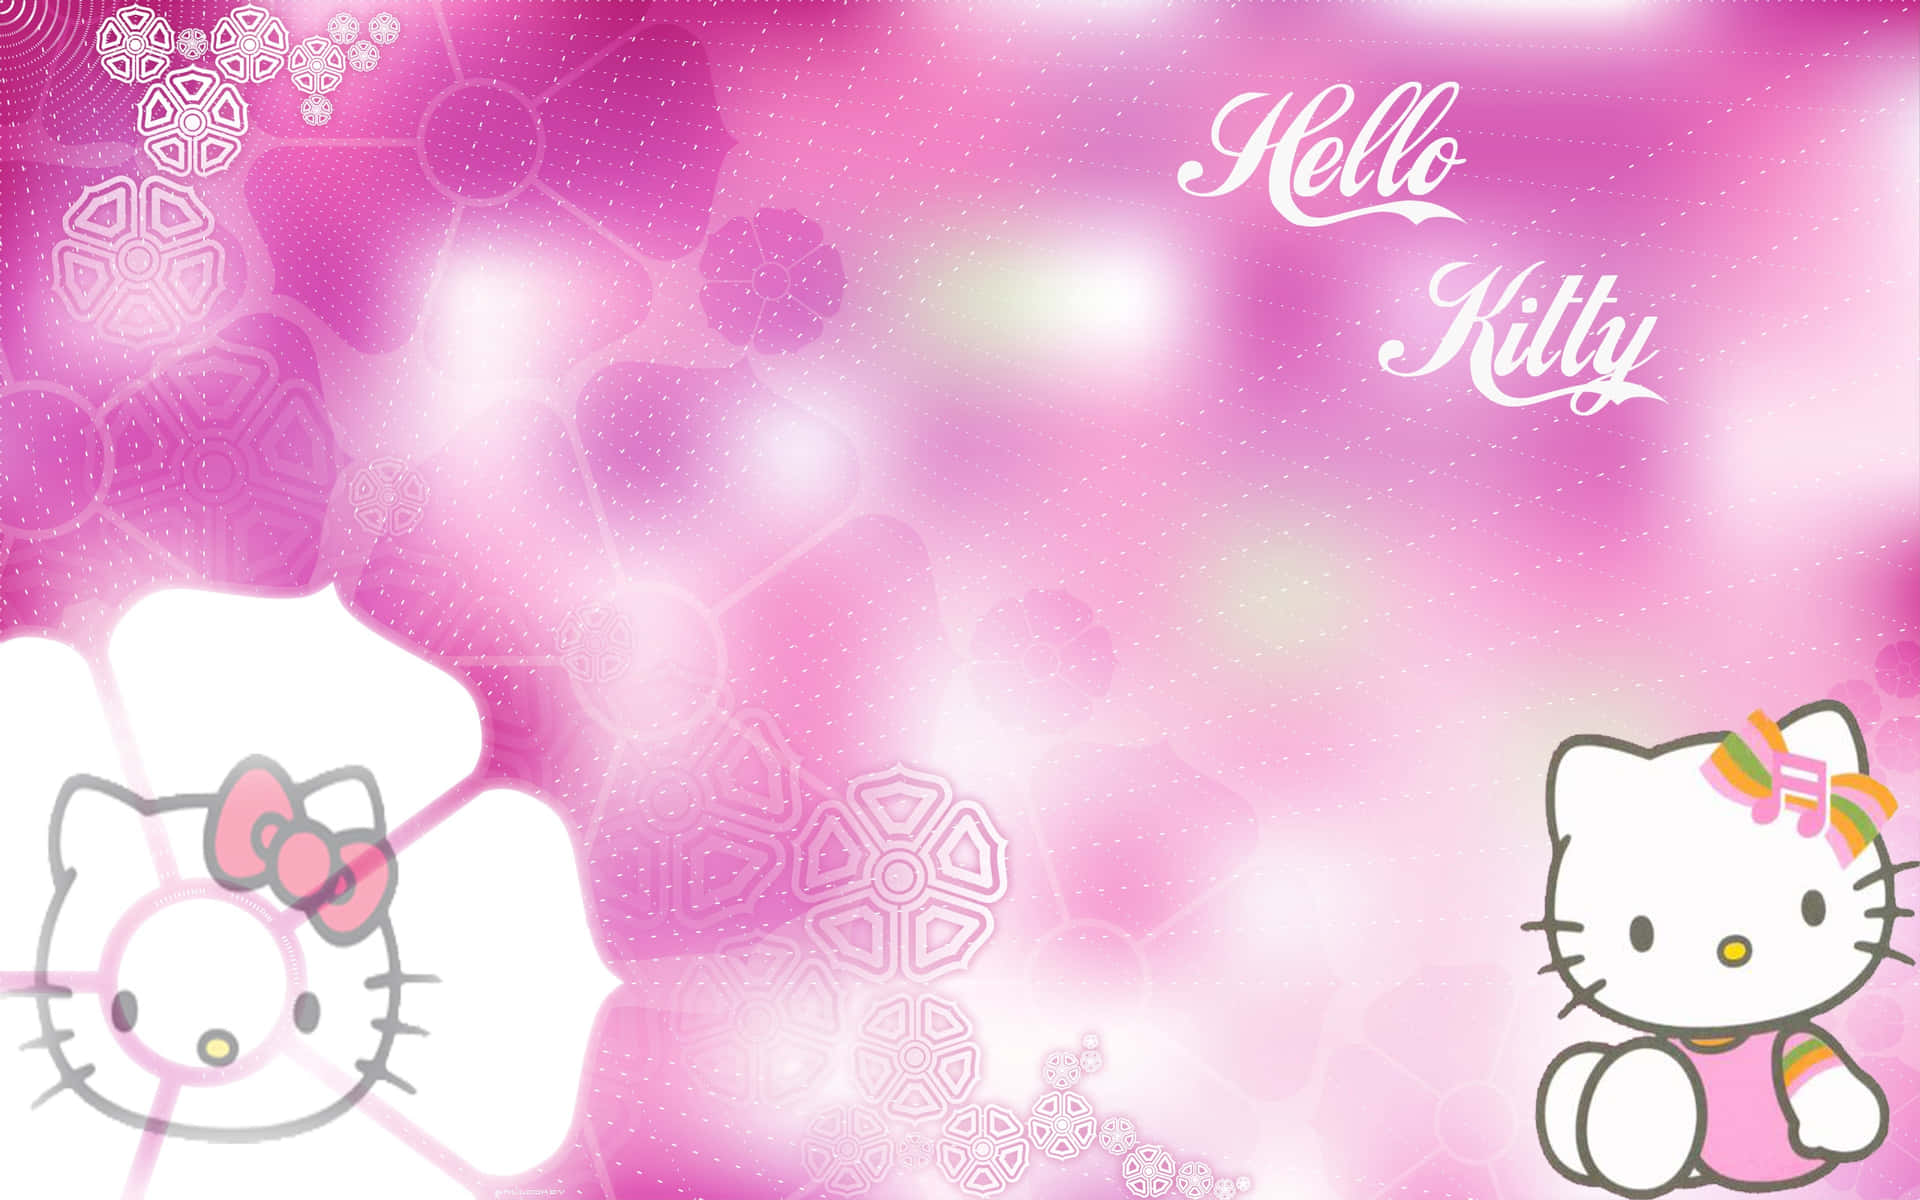 HELLO KITTY  Hello kitty backgrounds, Hello kitty pictures, Pink